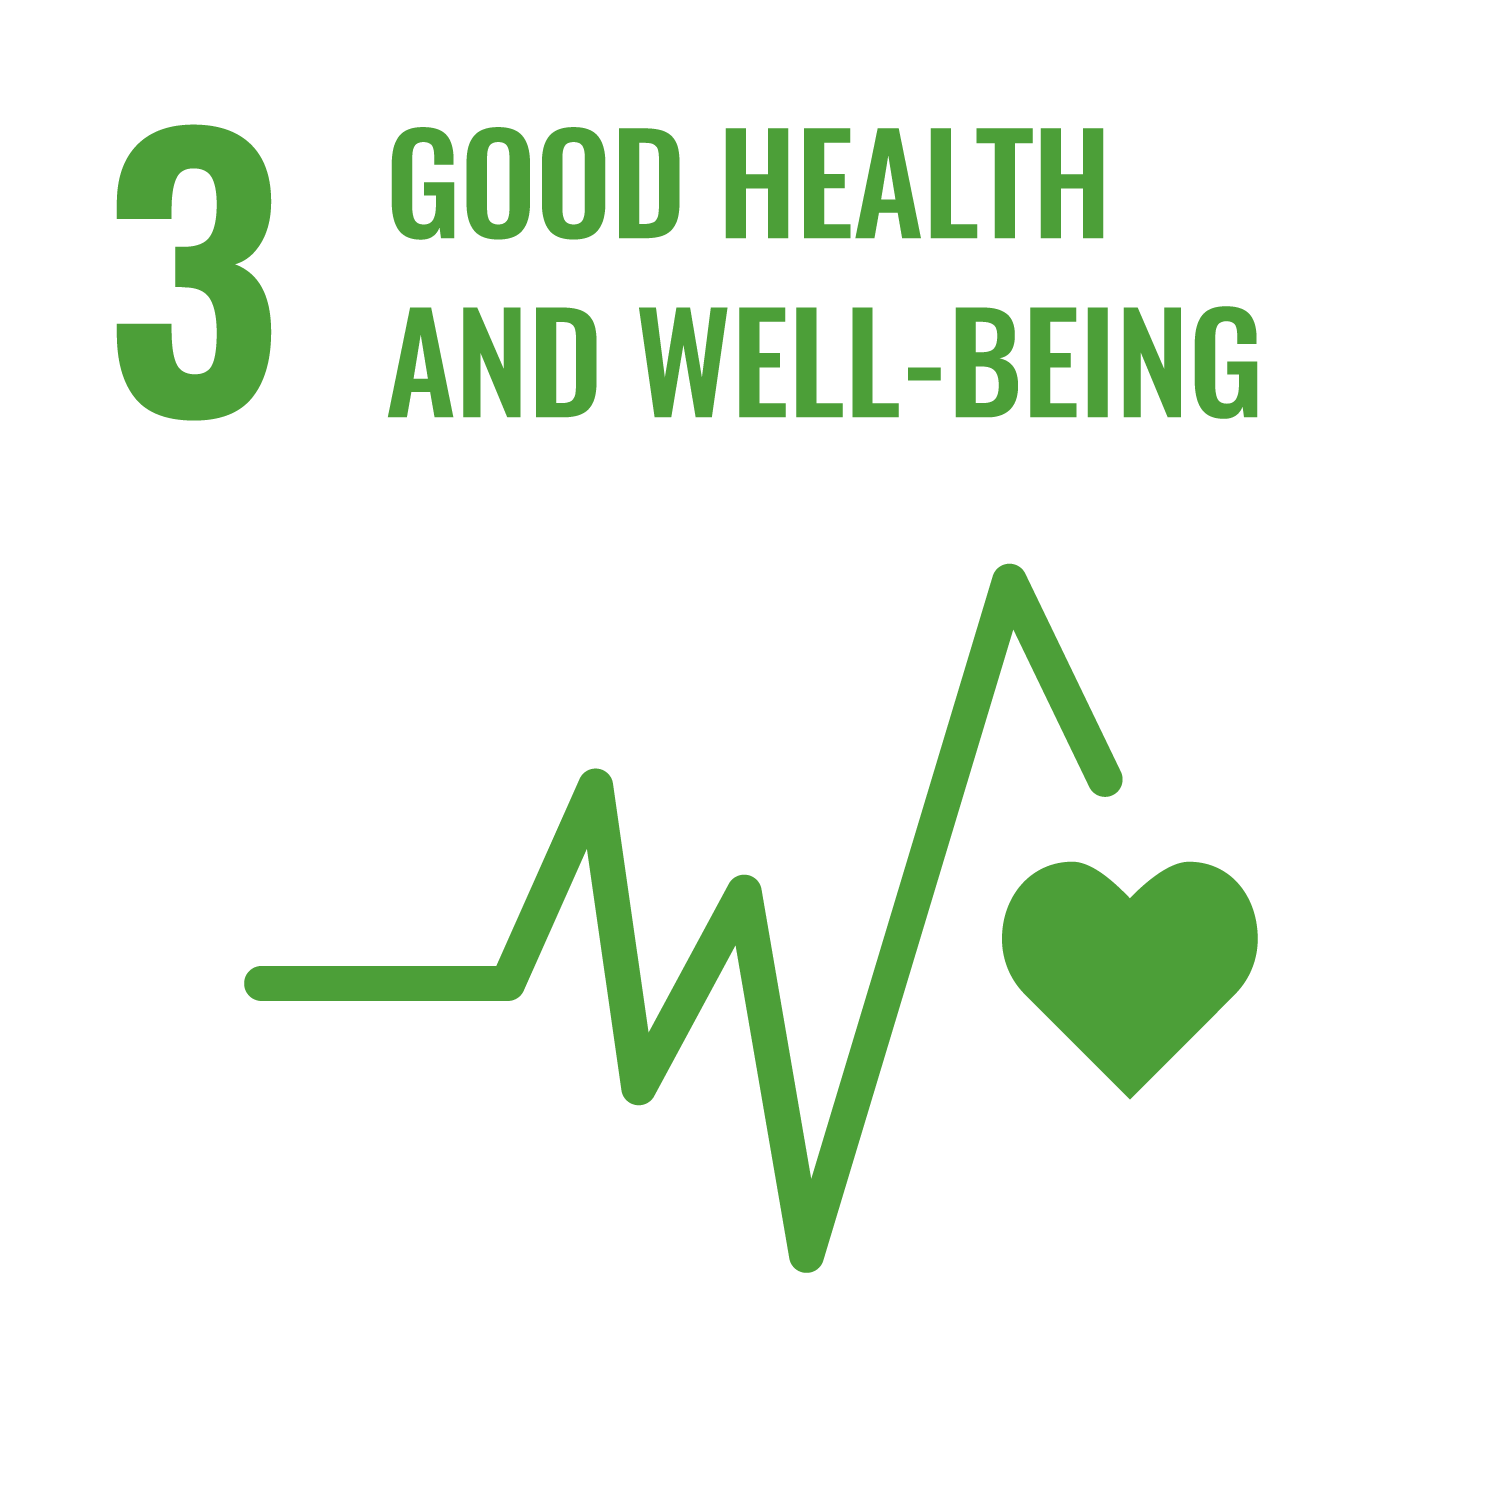 SDG3 Good Health and Well-Being